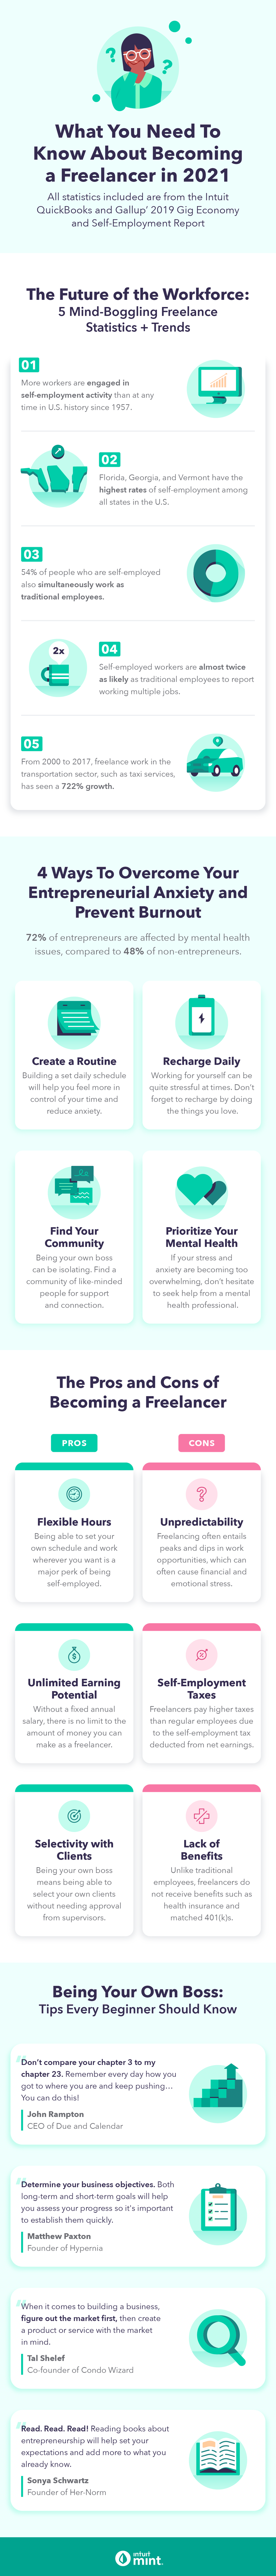 becoming-freelancer-2021-need-to-know